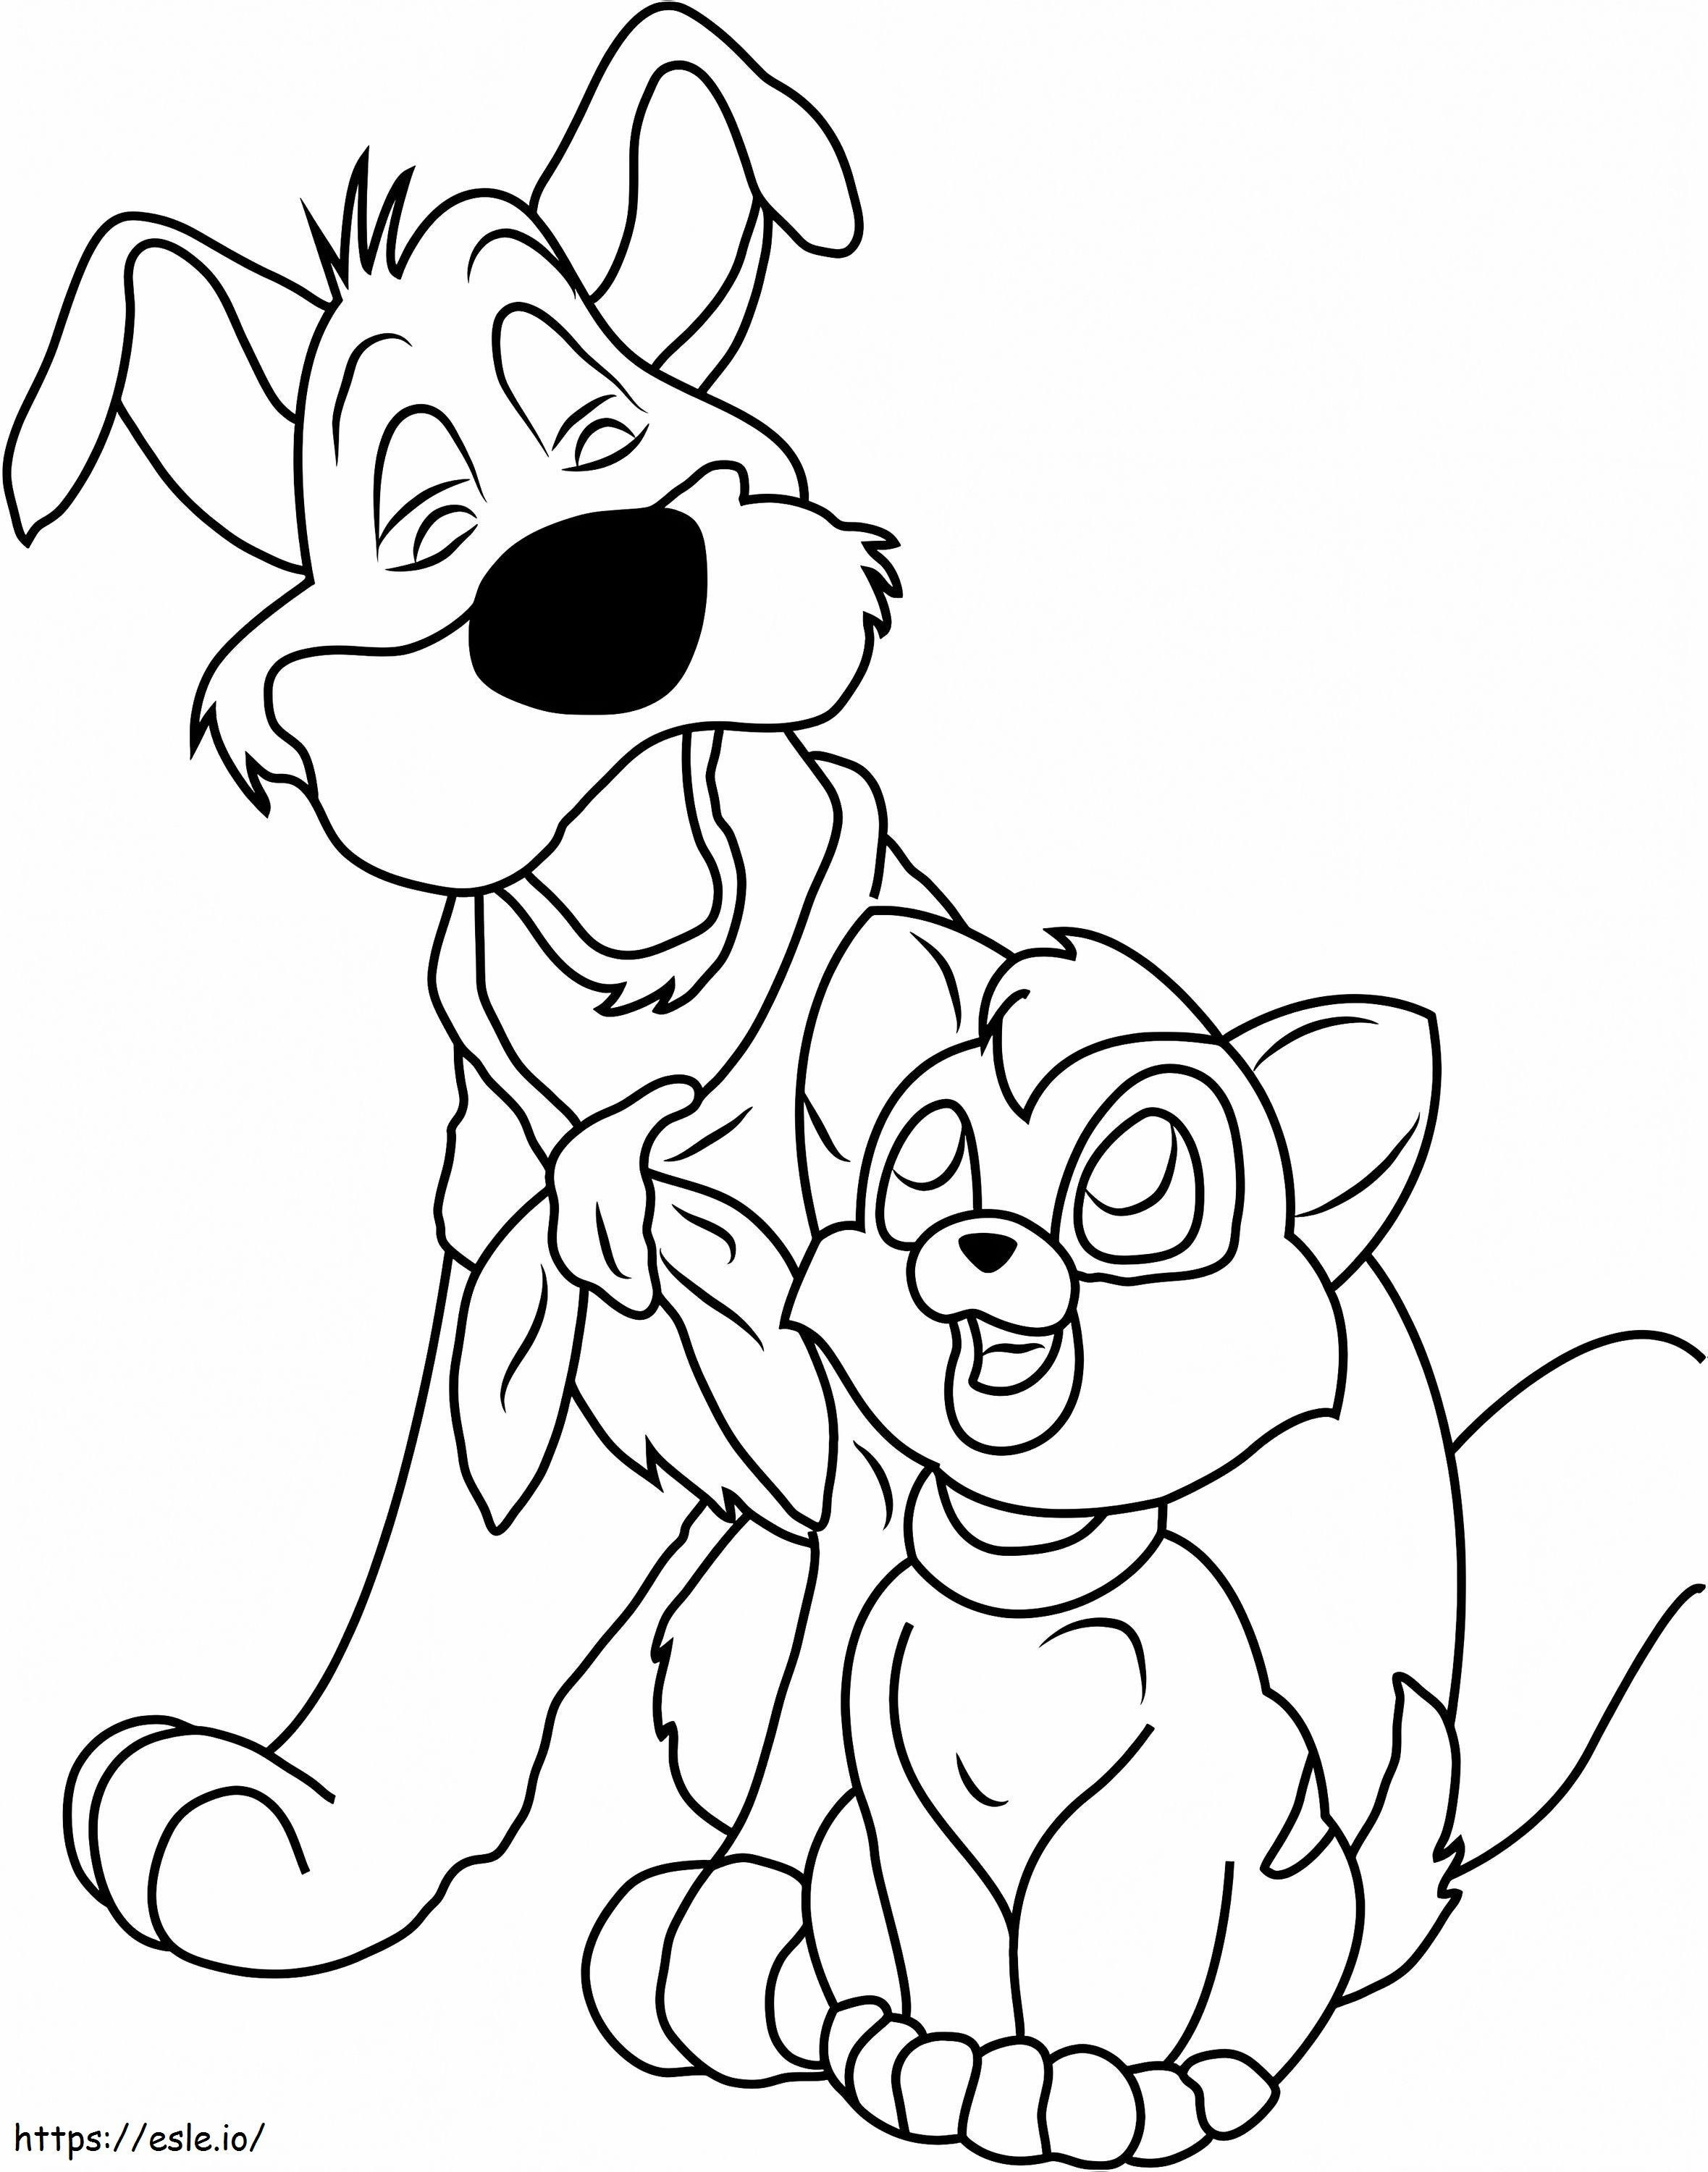 1532576064 Dodger And Oliver A4 coloring page